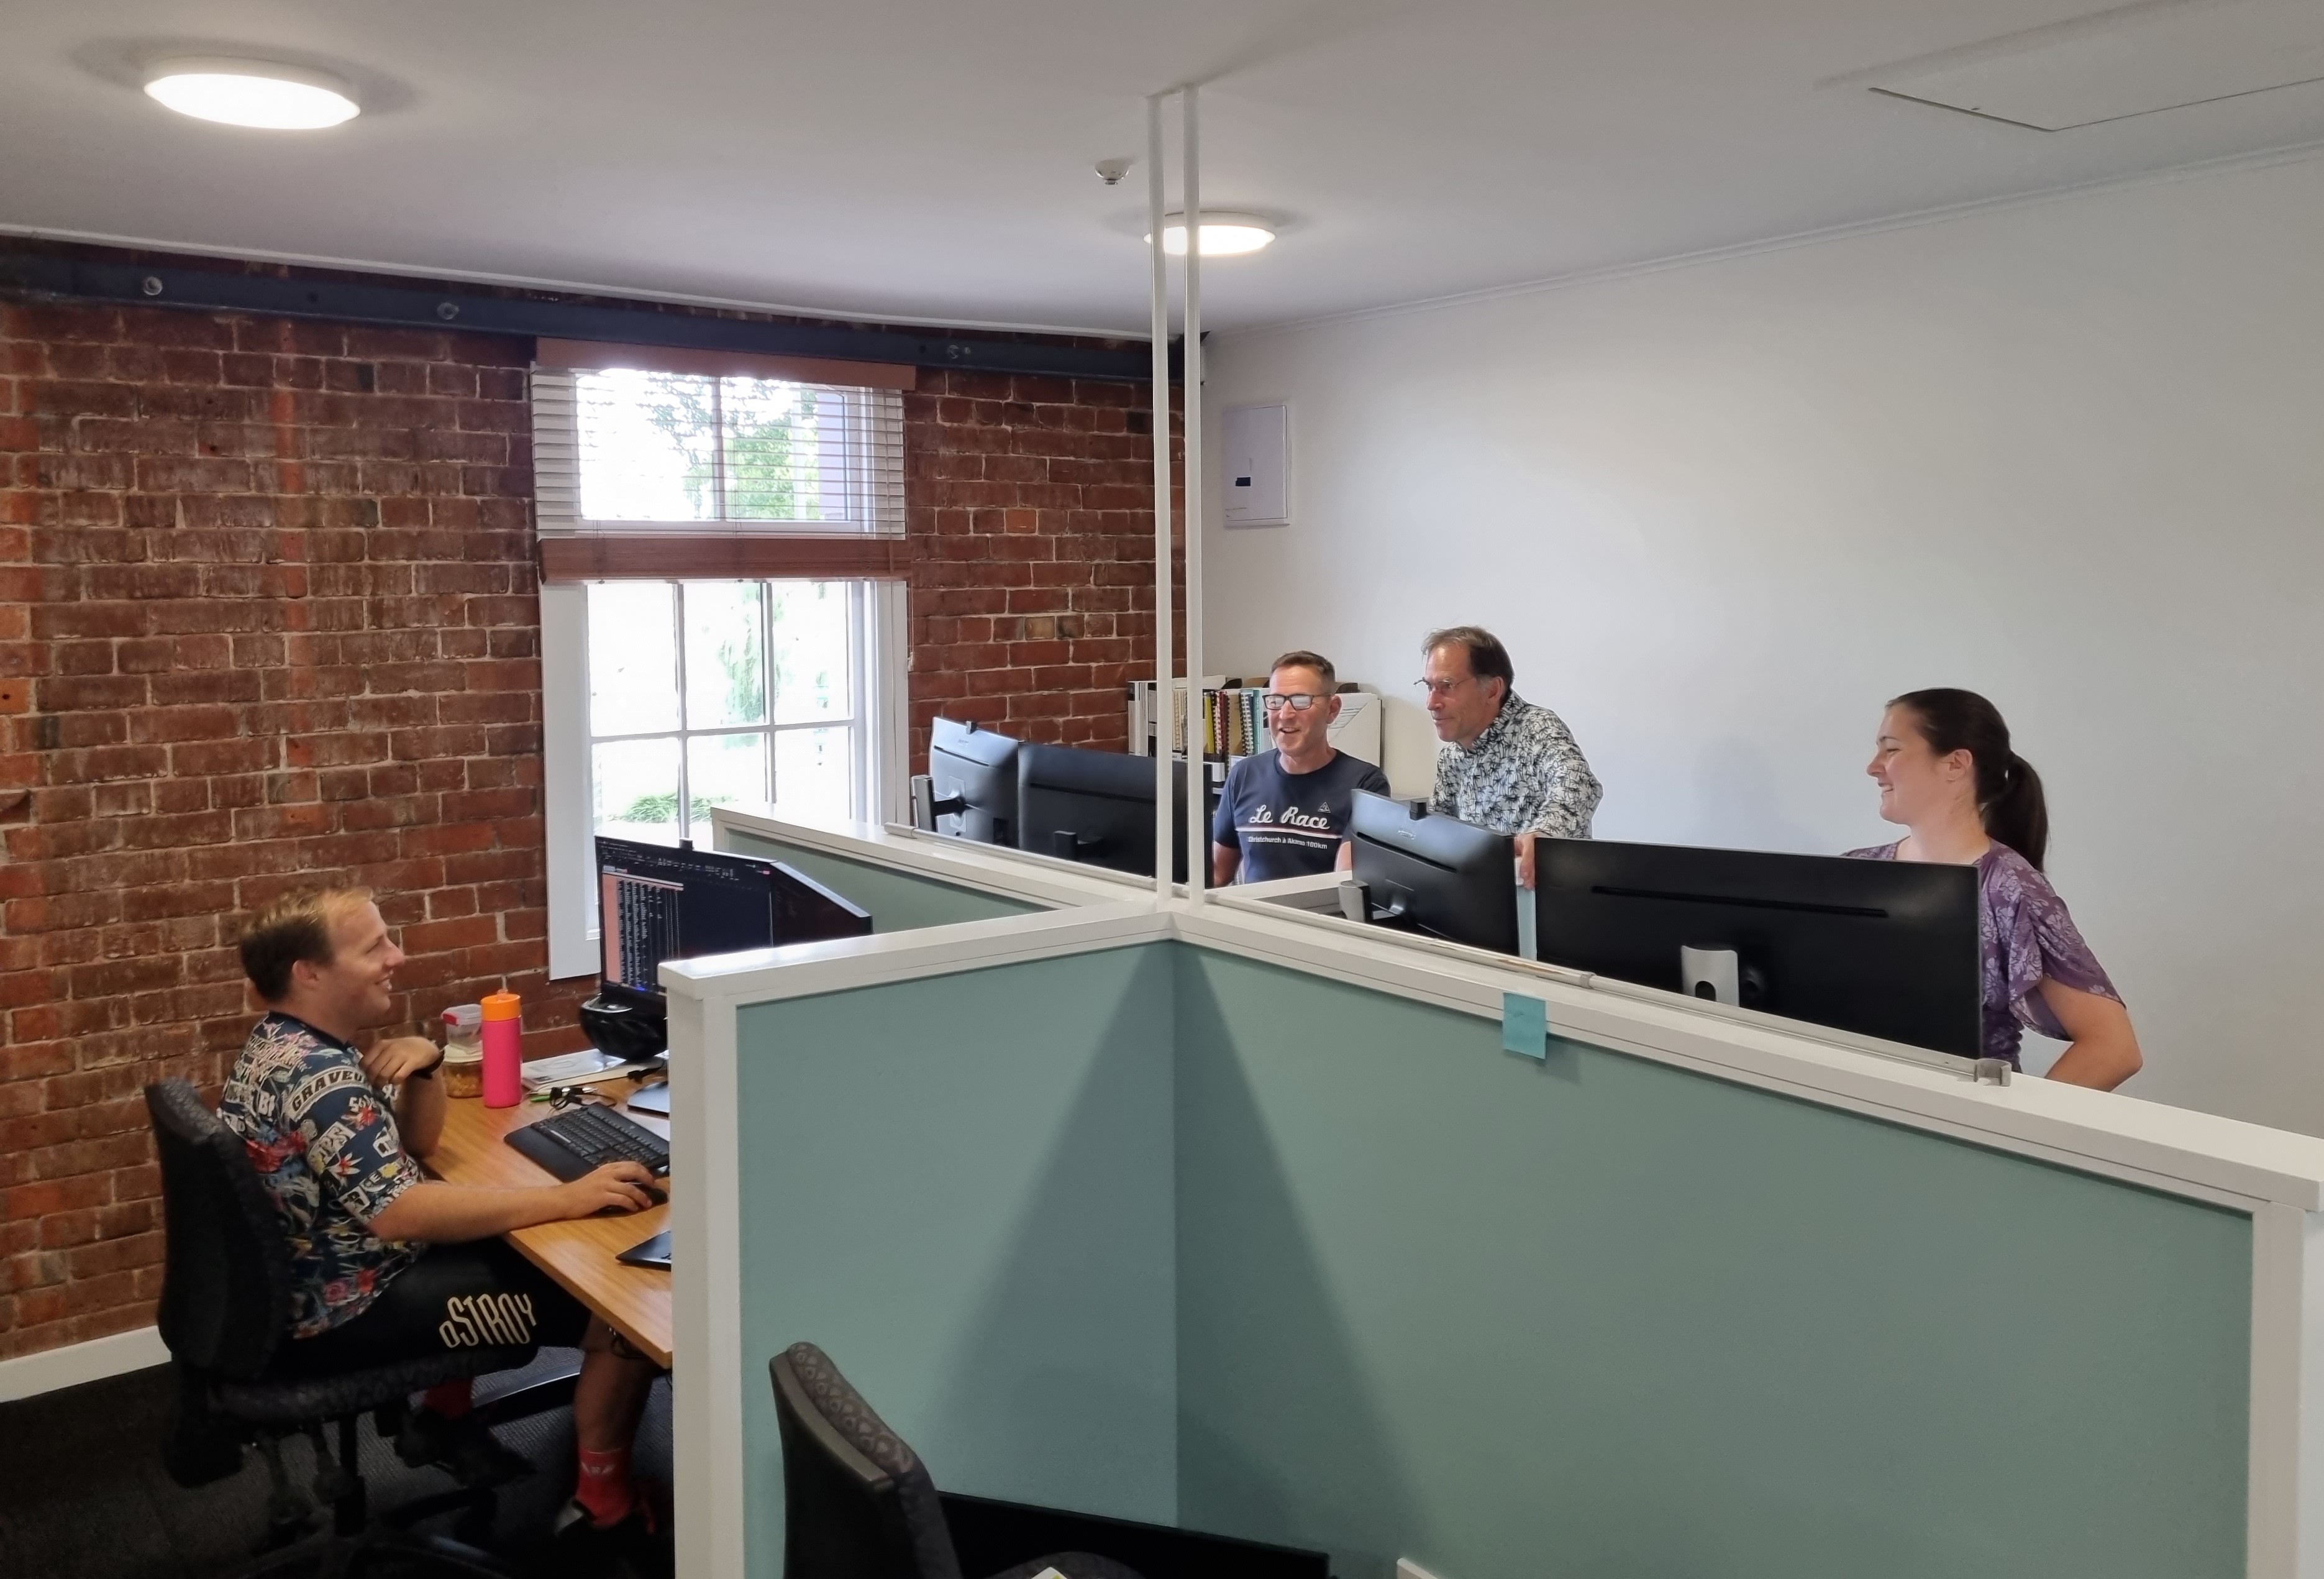 David, Warren, John and Megan working hard in our new office space